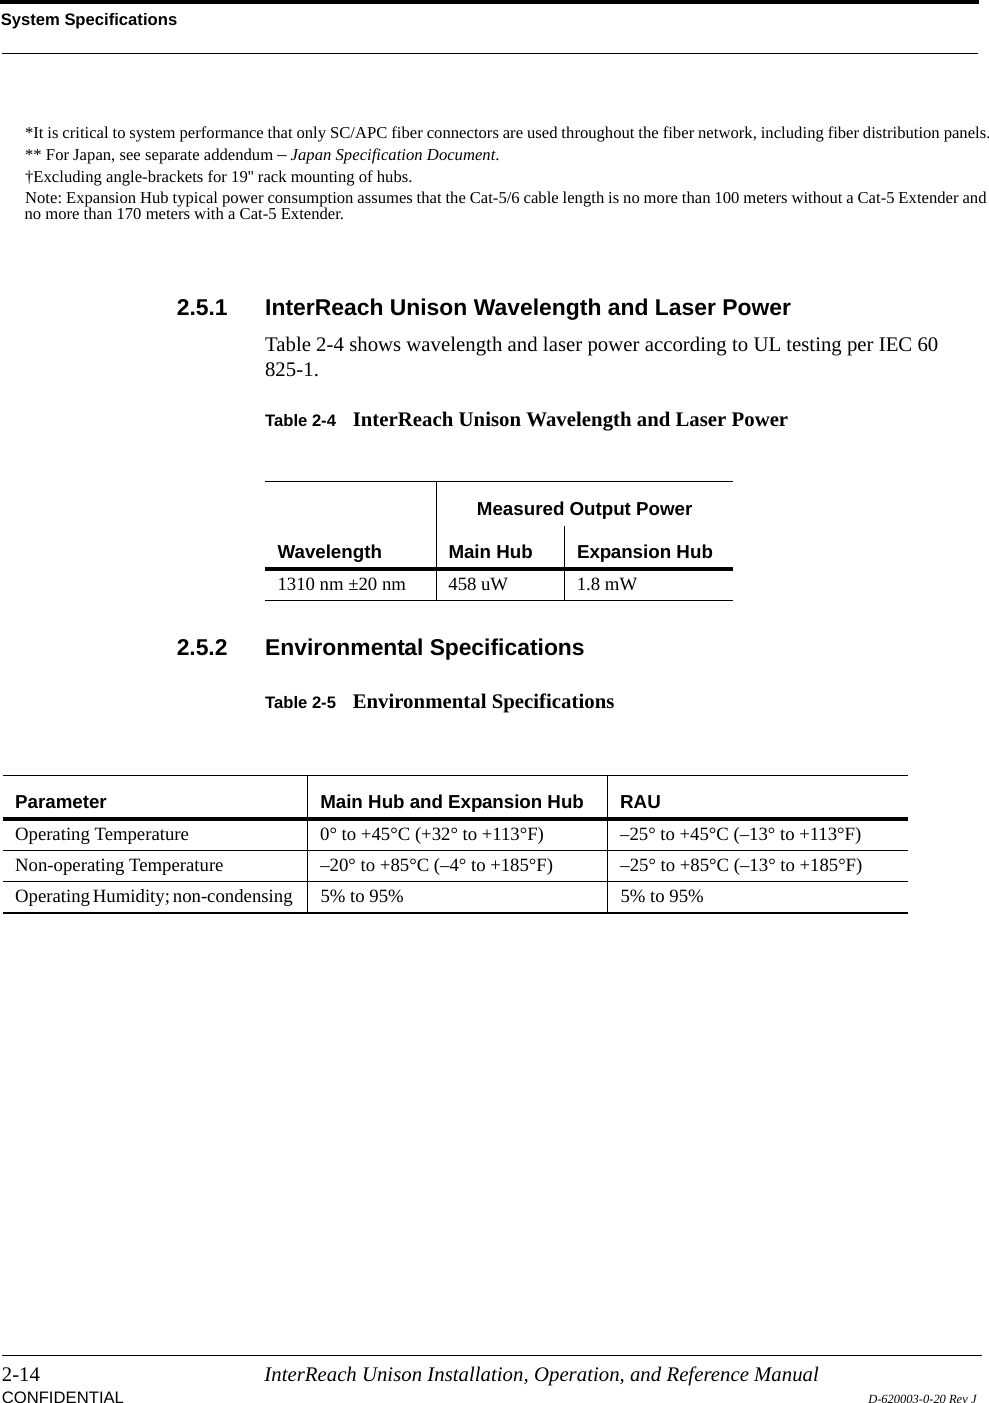 System Specifications2-14 InterReach Unison Installation, Operation, and Reference ManualCONFIDENTIAL D-620003-0-20 Rev J2.5.1 InterReach Unison Wavelength and Laser PowerTable 2-4 shows wavelength and laser power according to UL testing per IEC 60 825-1.Table 2-4 InterReach Unison Wavelength and Laser Power2.5.2 Environmental SpecificationsTable 2-5 Environmental Specifications*It is critical to system performance that only SC/APC fiber connectors are used throughout the fiber network, including fiber distribution panels.** For Japan, see separate addendum – Japan Specification Document.†Excluding angle-brackets for 19&apos;&apos; rack mounting of hubs.Note: Expansion Hub typical power consumption assumes that the Cat-5/6 cable length is no more than 100 meters without a Cat-5 Extender and no more than 170 meters with a Cat-5 Extender.WavelengthMeasured Output PowerMain Hub Expansion Hub1310 nm ±20 nm 458 uW 1.8 mWParameter Main Hub and Expansion Hub RAUOperating Temperature  0° to +45°C (+32° to +113°F) –25° to +45°C (–13° to +113°F)Non-operating Temperature  –20° to +85°C (–4° to +185°F) –25° to +85°C (–13° to +185°F)Operating Humidity; non-condensing  5% to 95% 5% to 95%